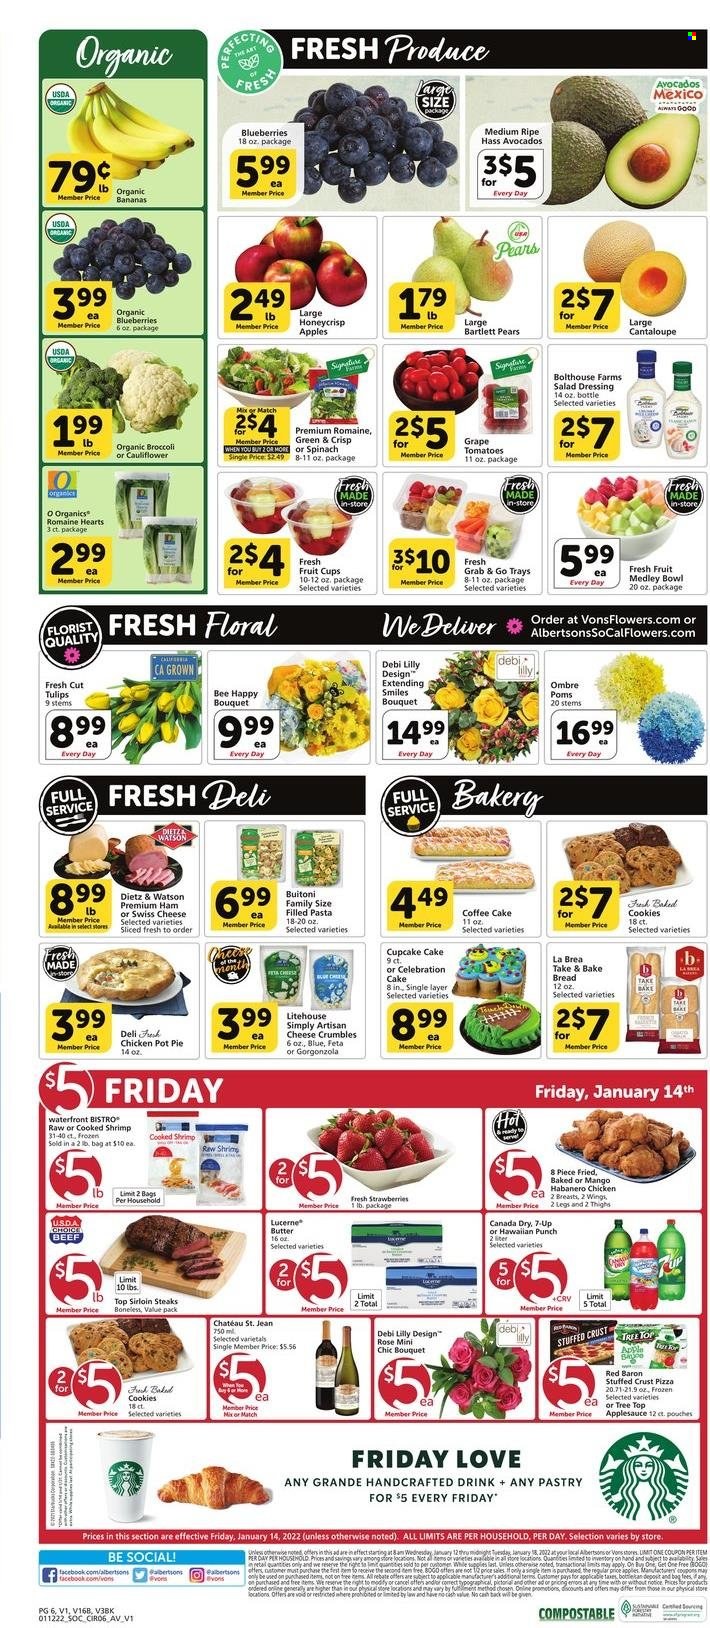 thumbnail - Albertsons Flyer - 01/12/2022 - 01/18/2022 - Sales products - Bartlett pears, fruit cup, organic bananas, bread, cake, pie, cupcake, pot pie, coffee cake, broccoli, cantaloupe, avocado, bananas, blueberries, strawberries, pears, shrimps, pizza, pasta, habanero chicken, Buitoni, filled pasta, ham, Dietz & Watson, swiss cheese, gorgonzola, feta, cheese crumbles, butter, Red Baron, cookies, Celebration, salad dressing, dressing, apple sauce, Canada Dry, 7UP, wine, rosé wine, punch, steak, sirloin steak, pot, tulip, bouquet, rose. Page 6.